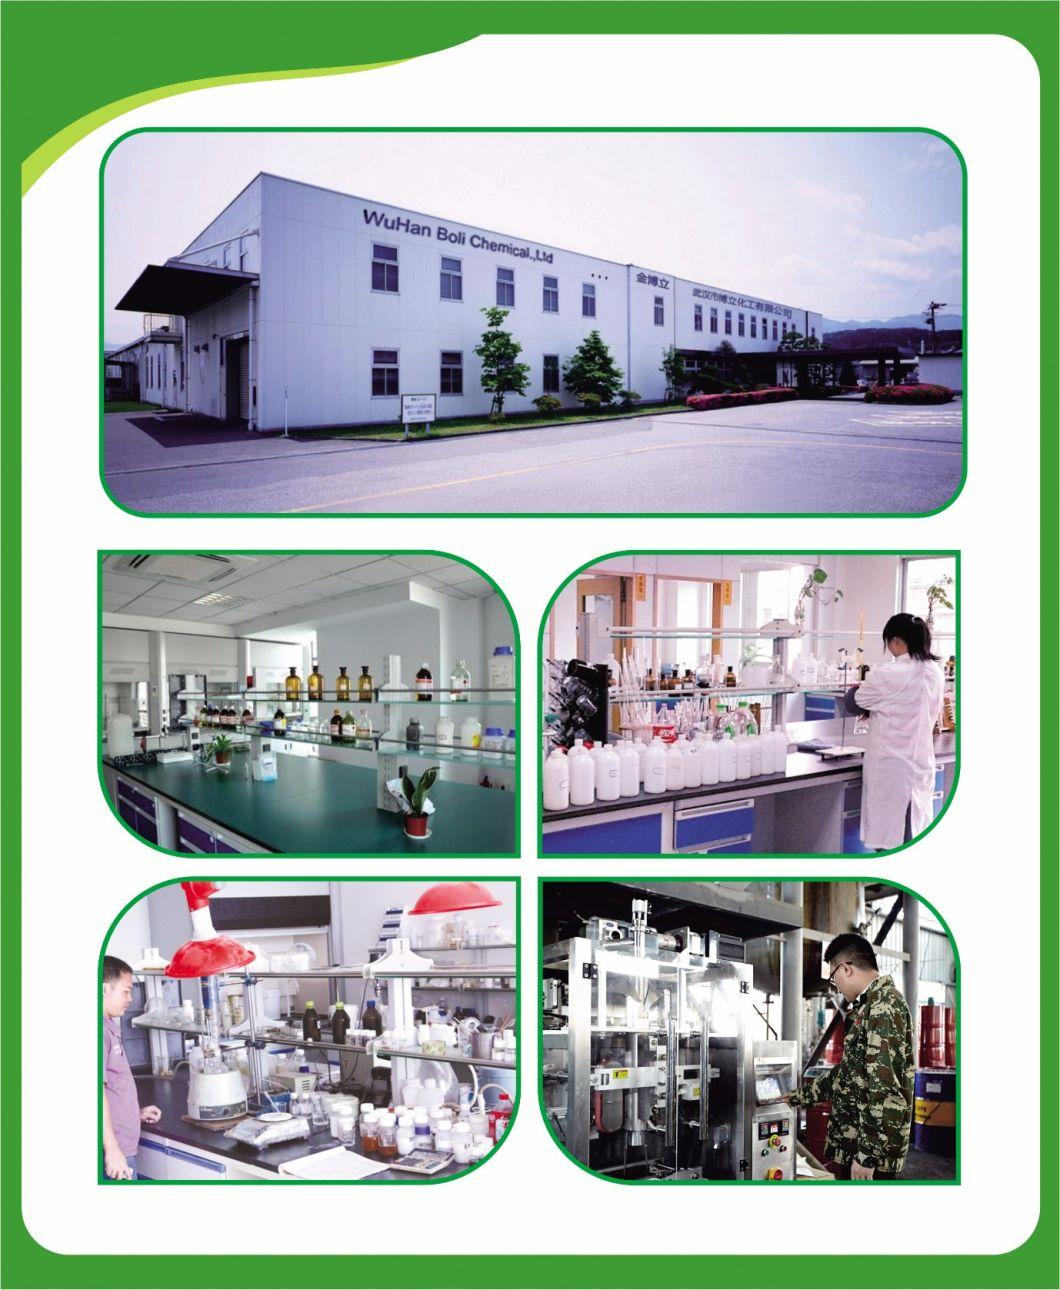 GBL China Factory All-Powerful Adhesive Designed for Furniture Installation and Woodwork